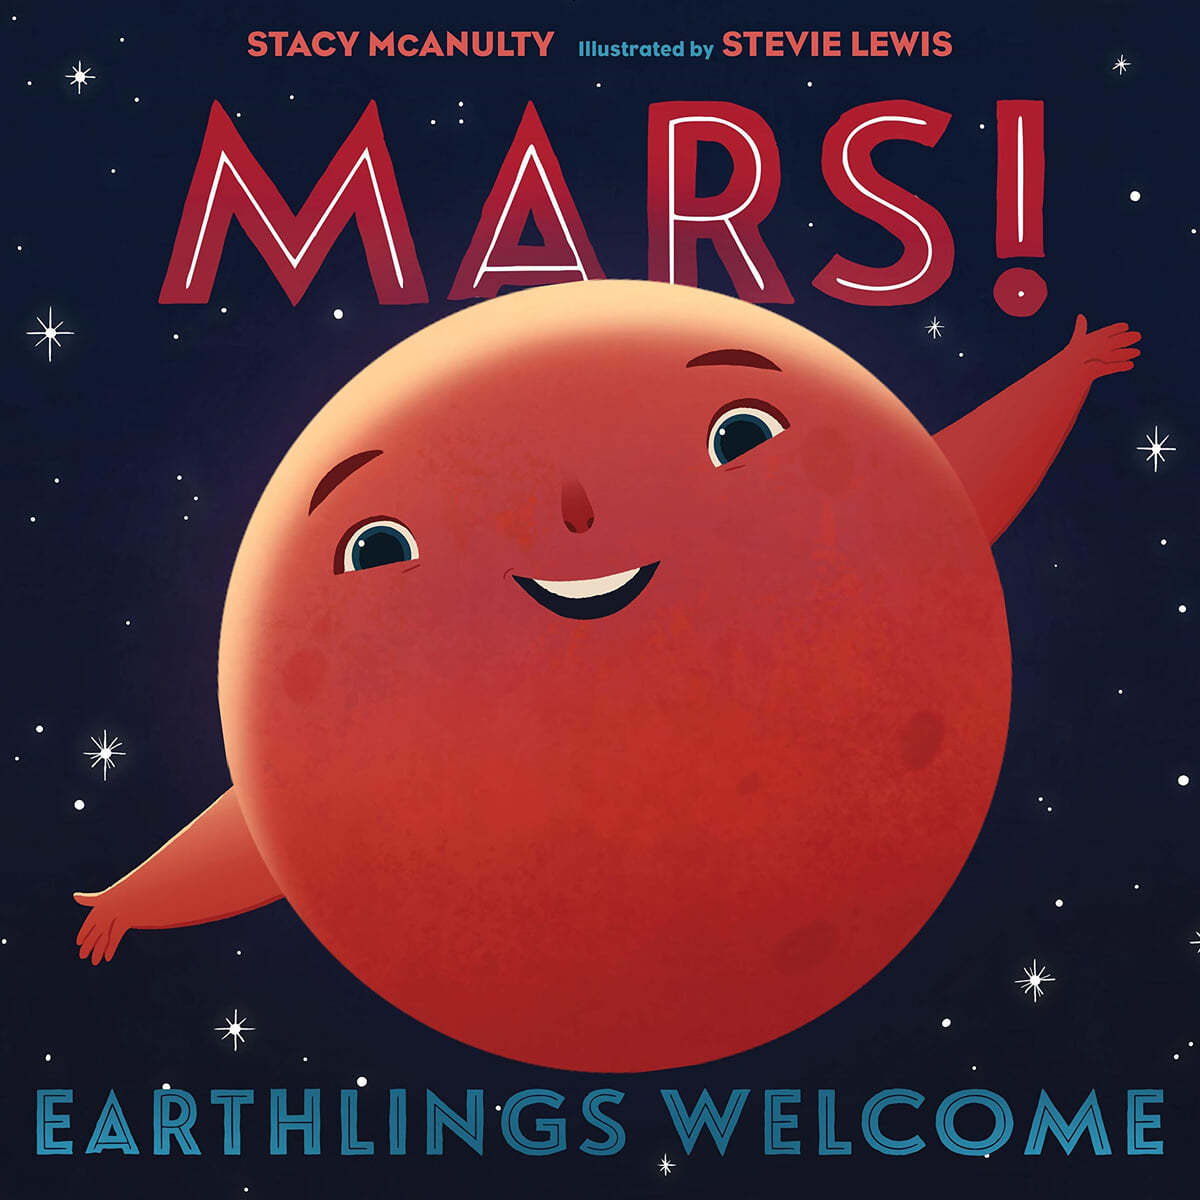 Our Universe : Mars! Earthlings Welcome